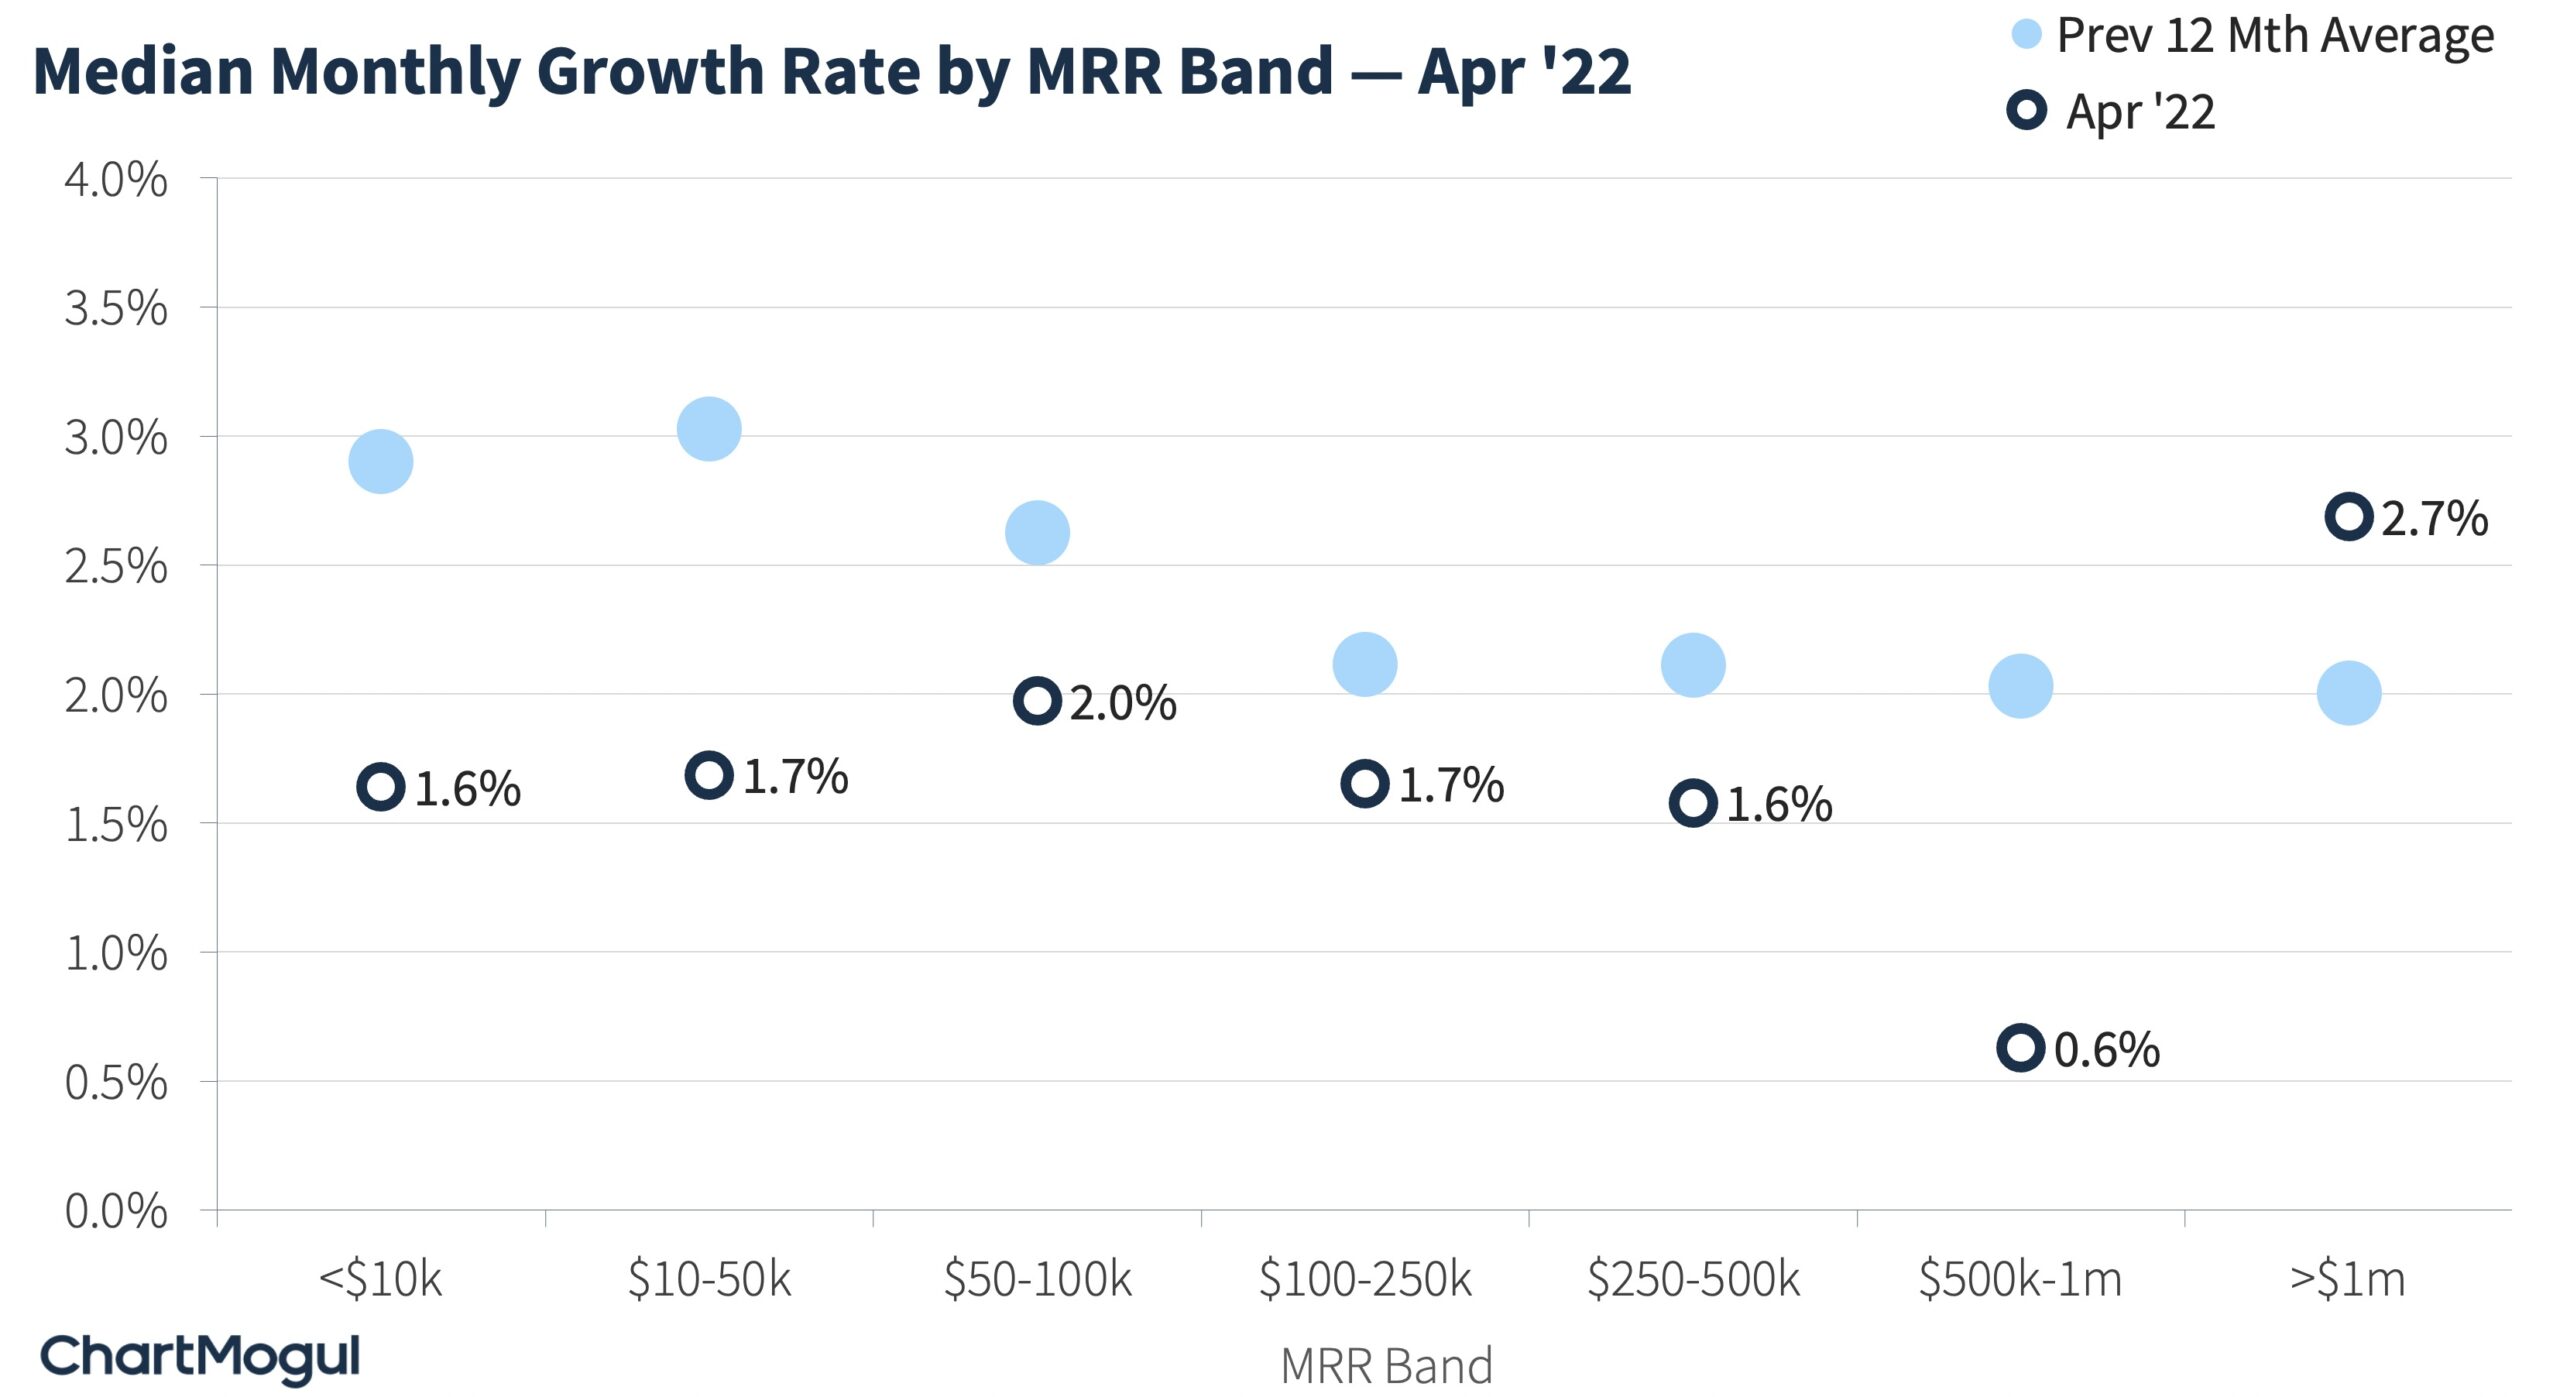 SaaS Growth Slowdown for the month of April